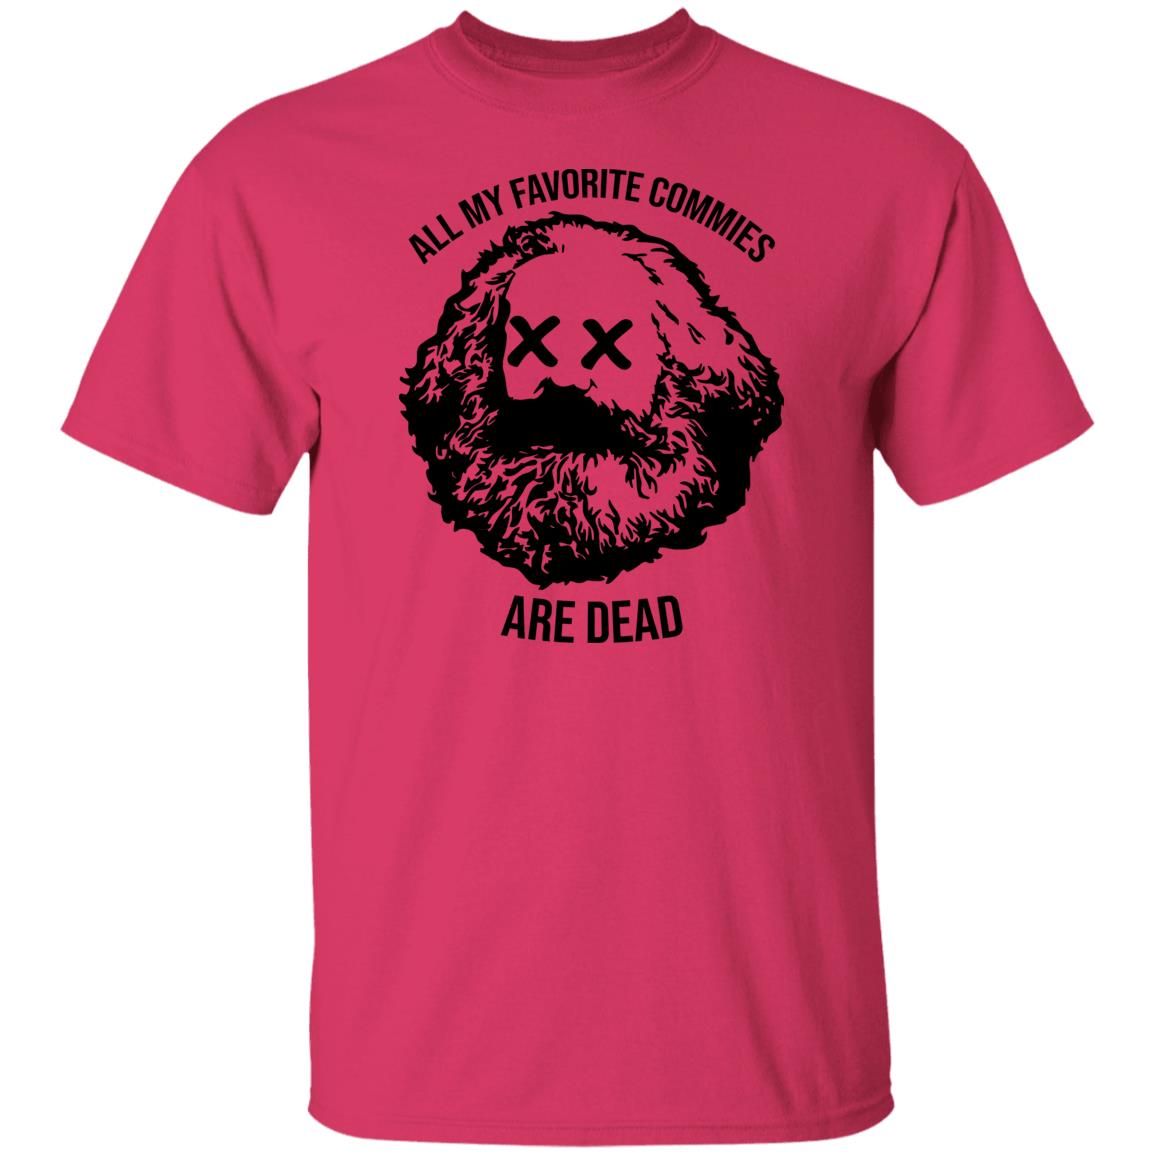 All My Favorite Commies Are Dead Shirt Pureblood Negro S.O.B.